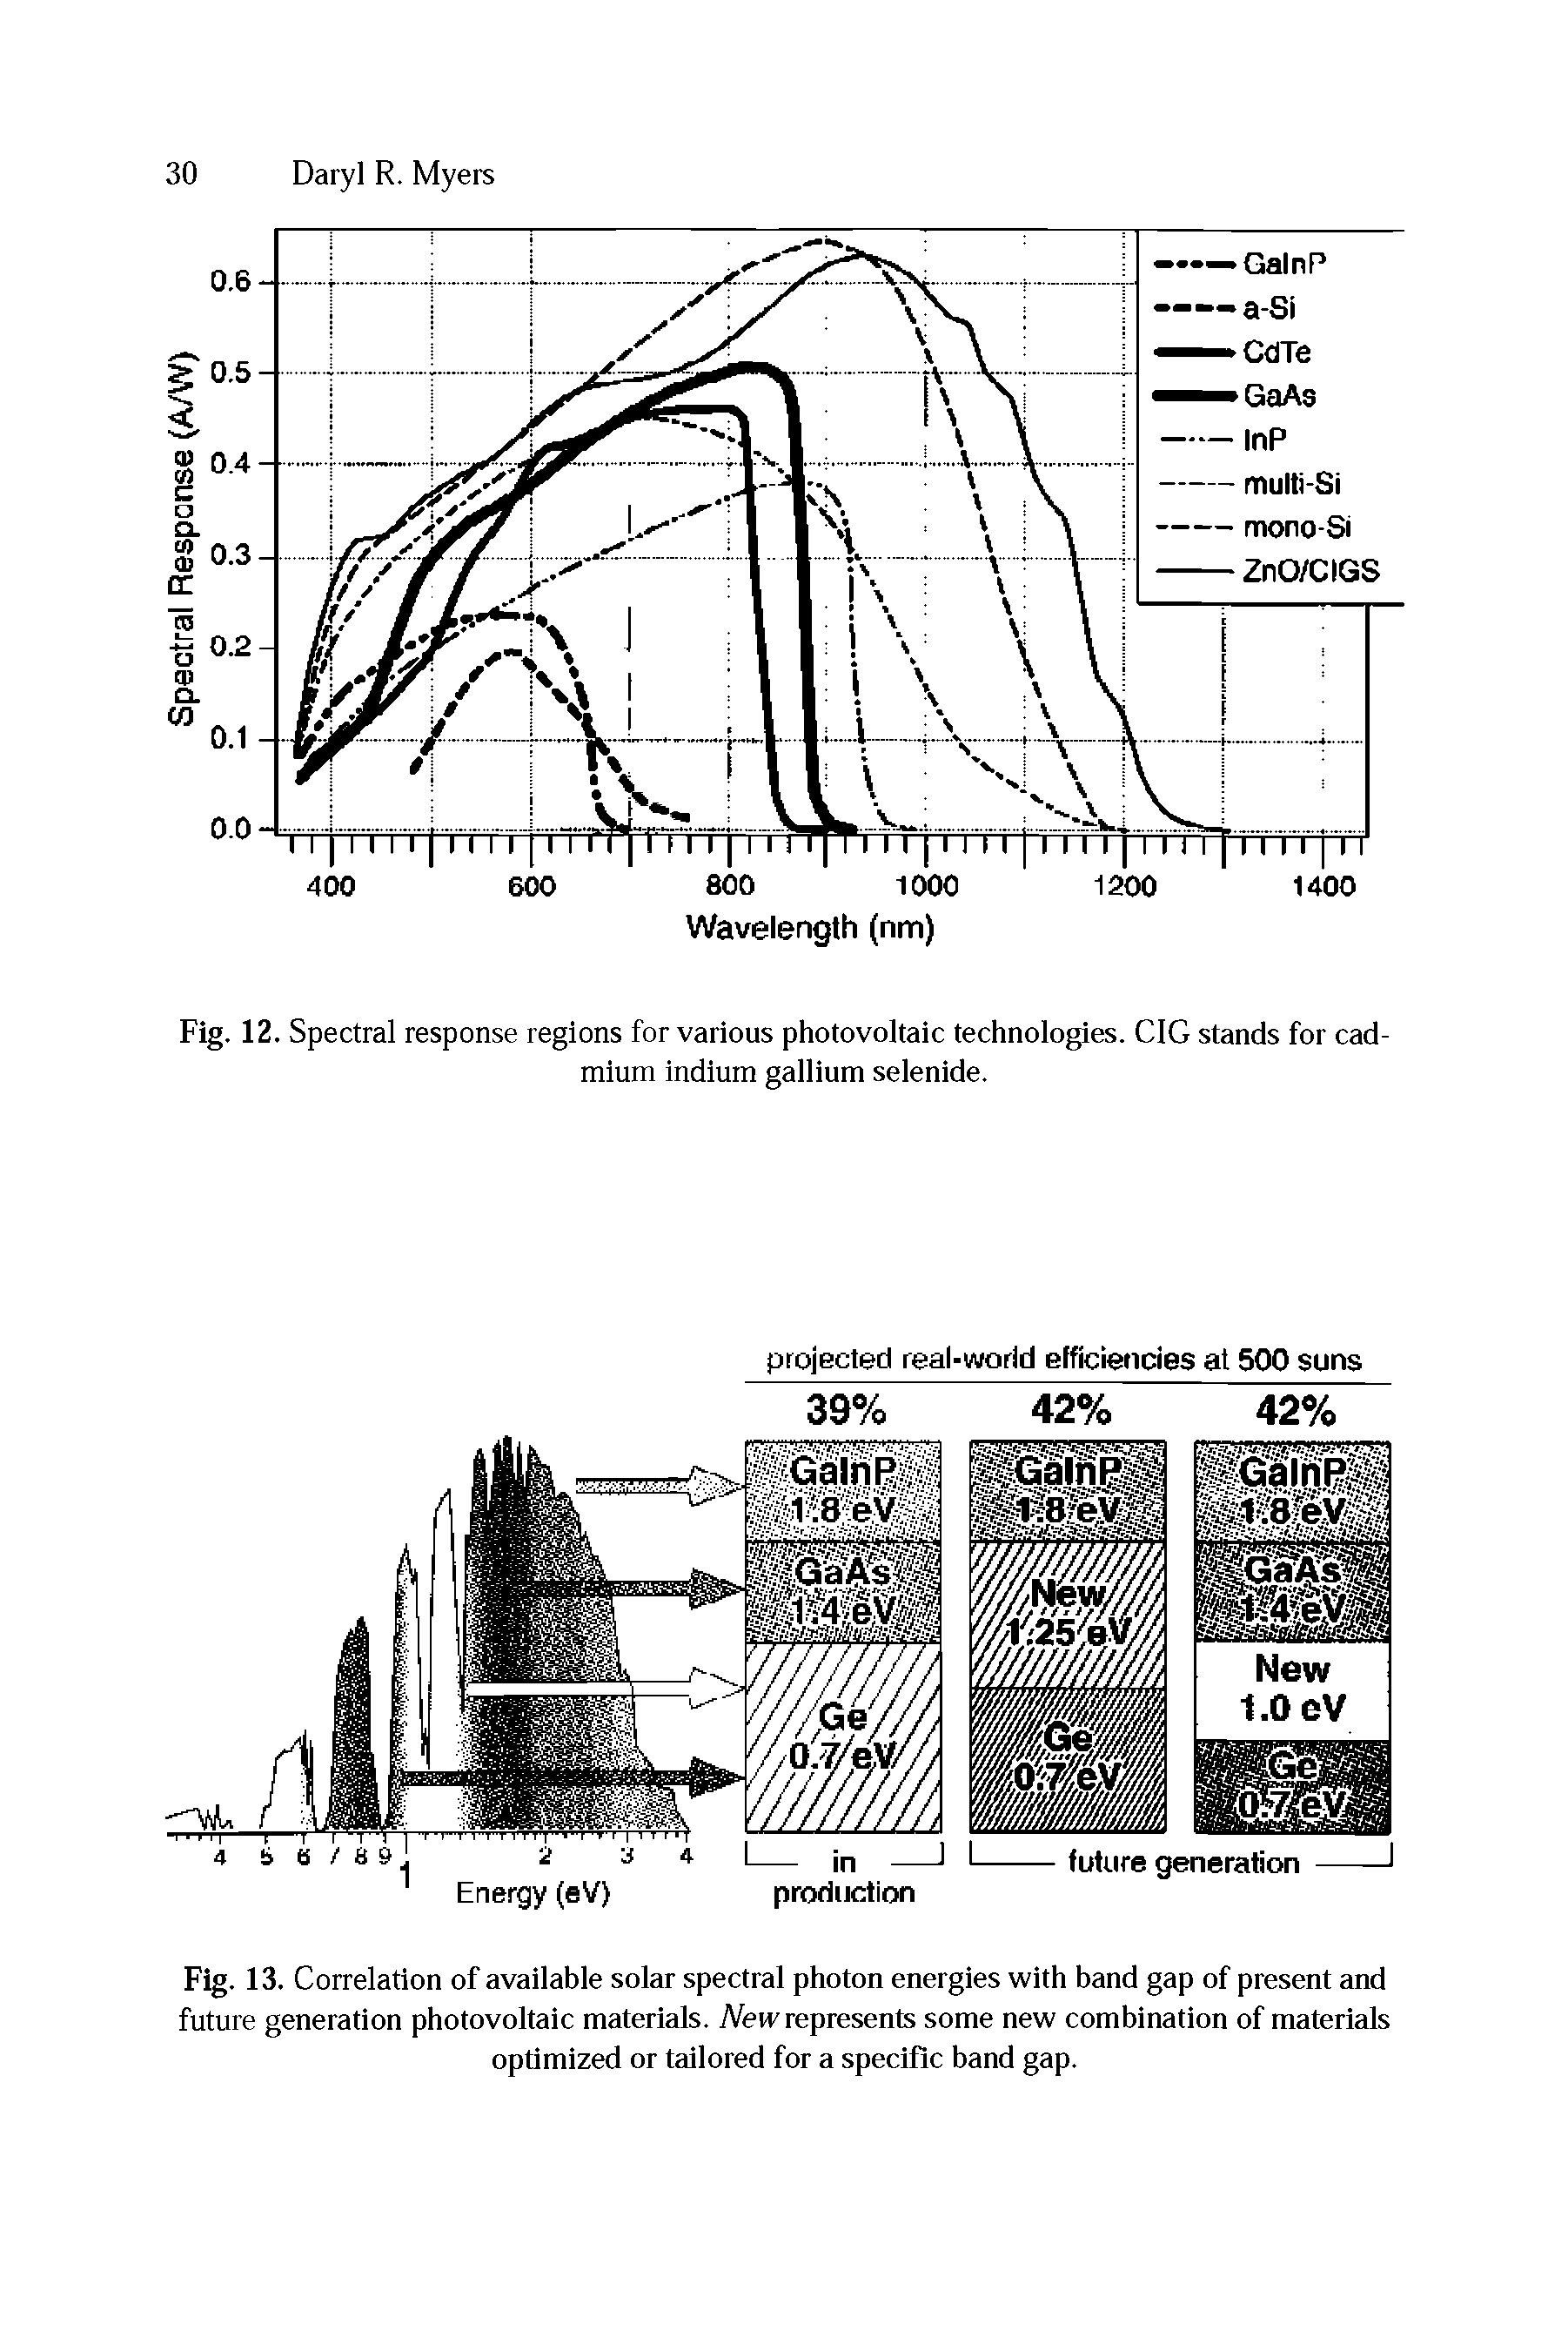 Fig. 13. Correlation of available solar spectral photon energies with band gap of present and future generation photovoltaic materials. New represents some new combination of materials optimized or tailored for a specific band gap.